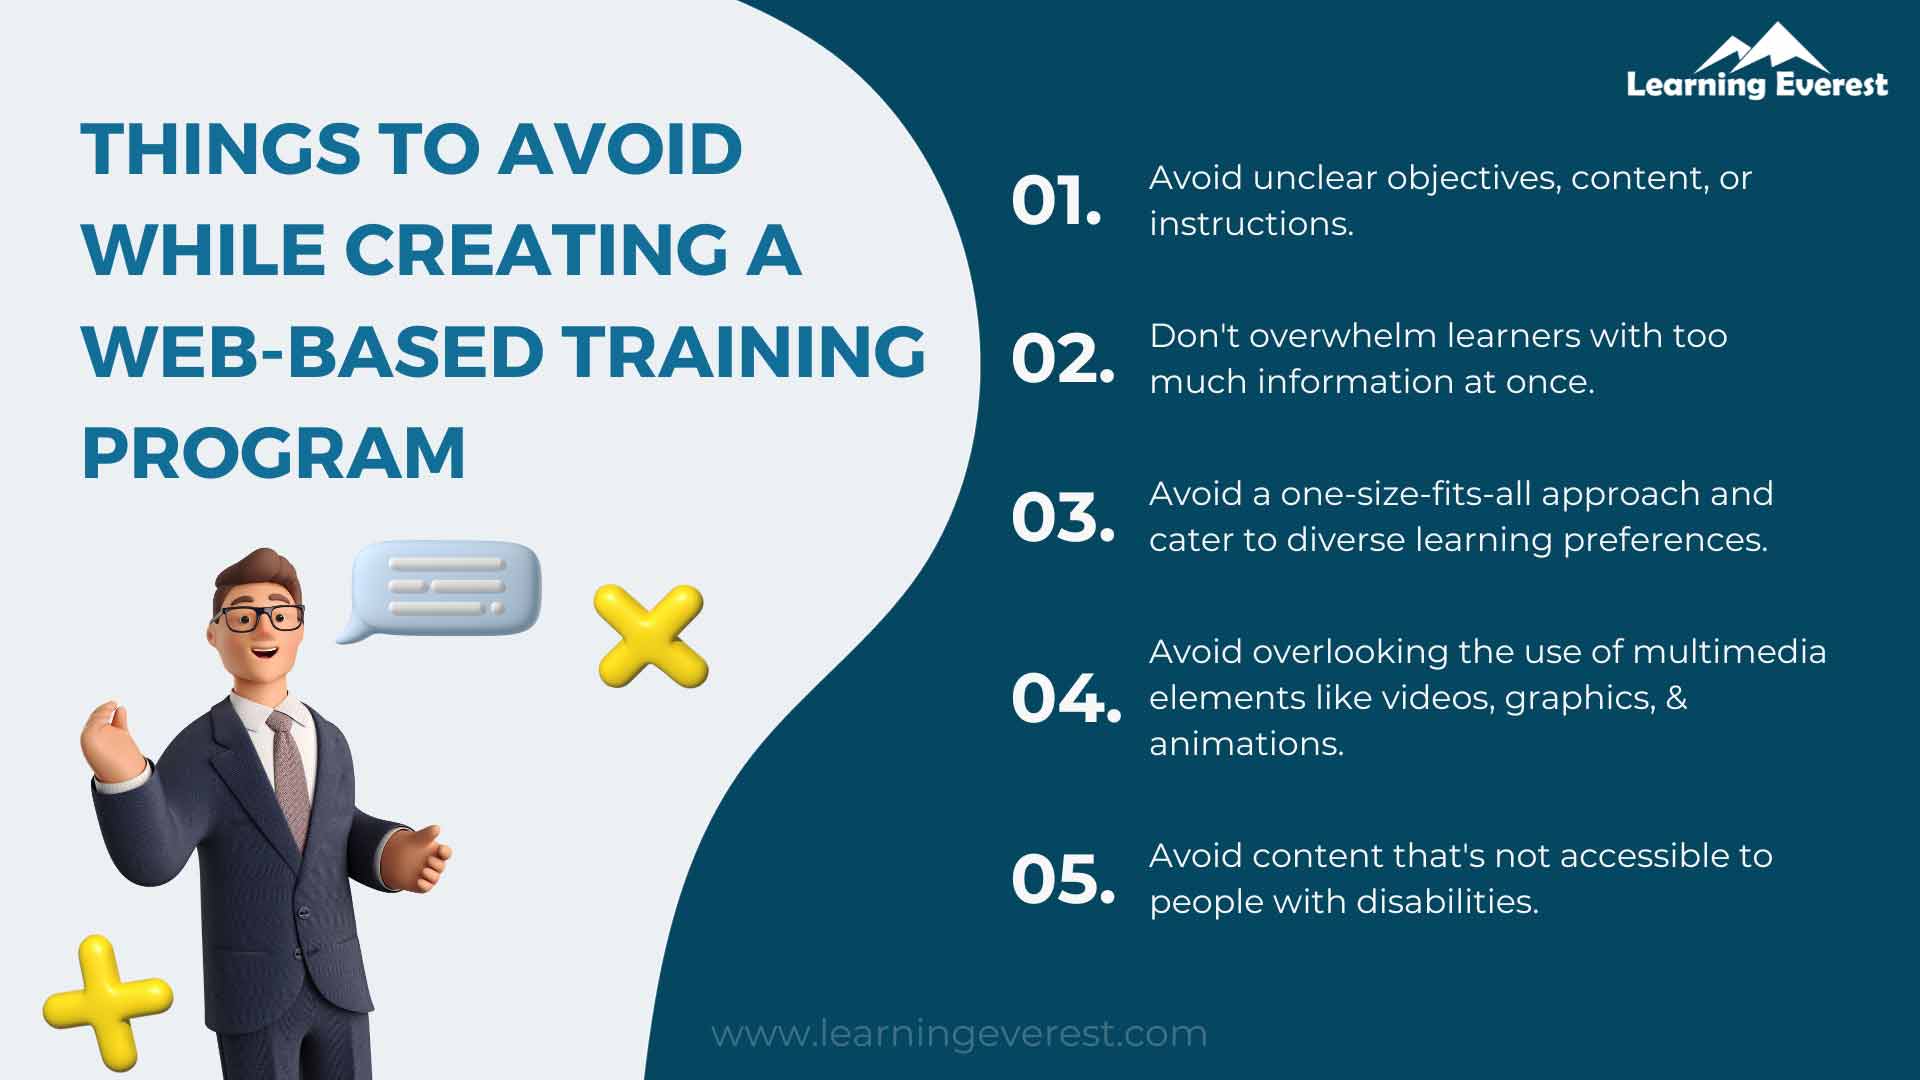 Things to Avoid While Creating a Web-Based Training Program